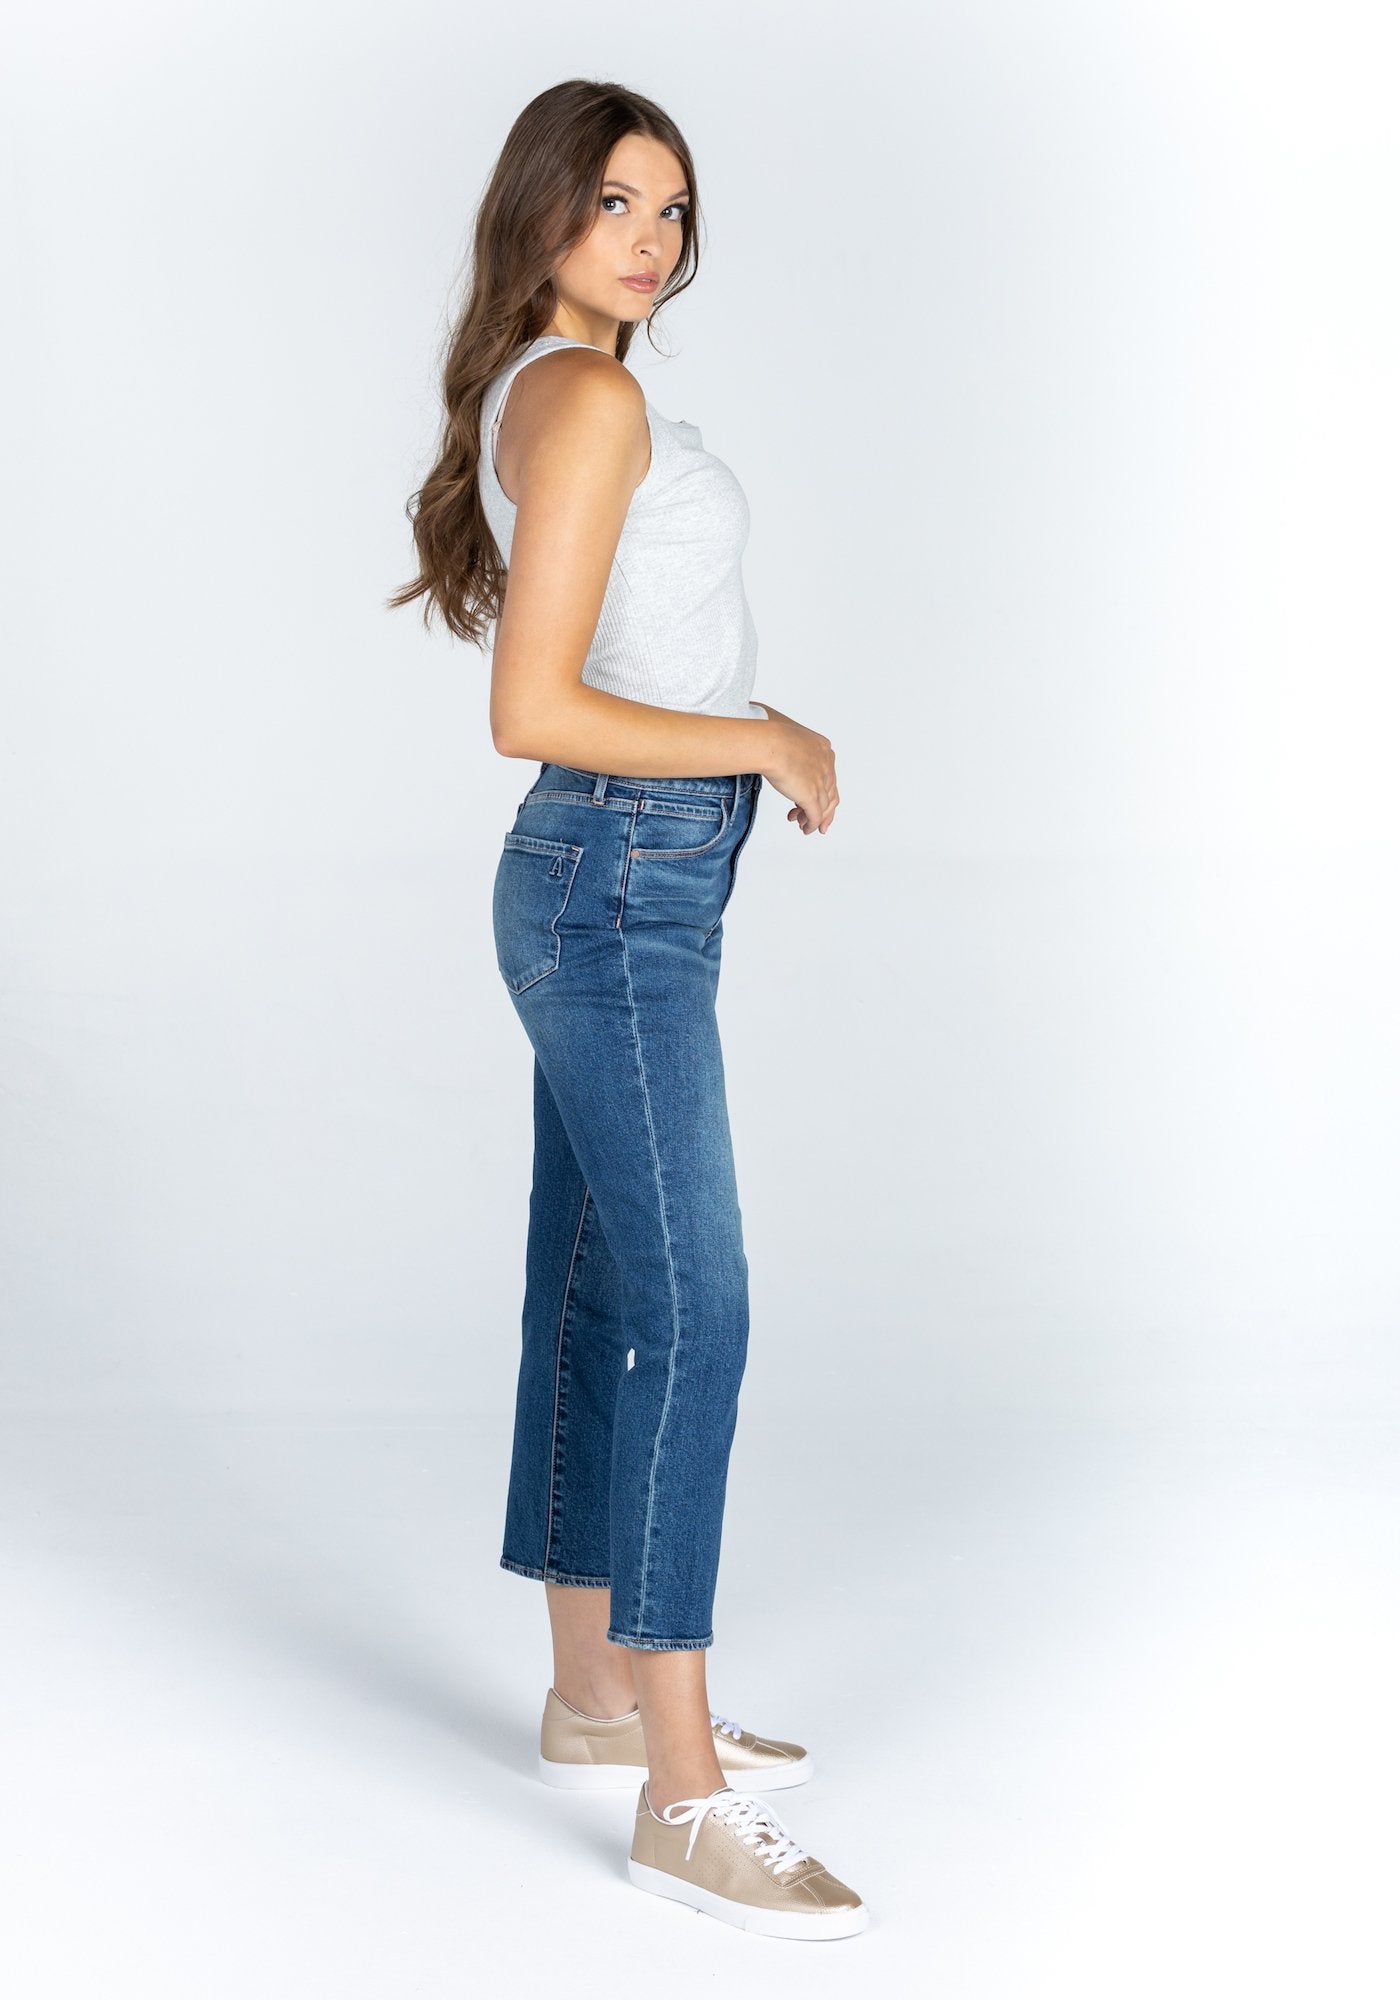 The Kate Cropped Straight Leg Jeans by Articles of Society - Ewa Beach